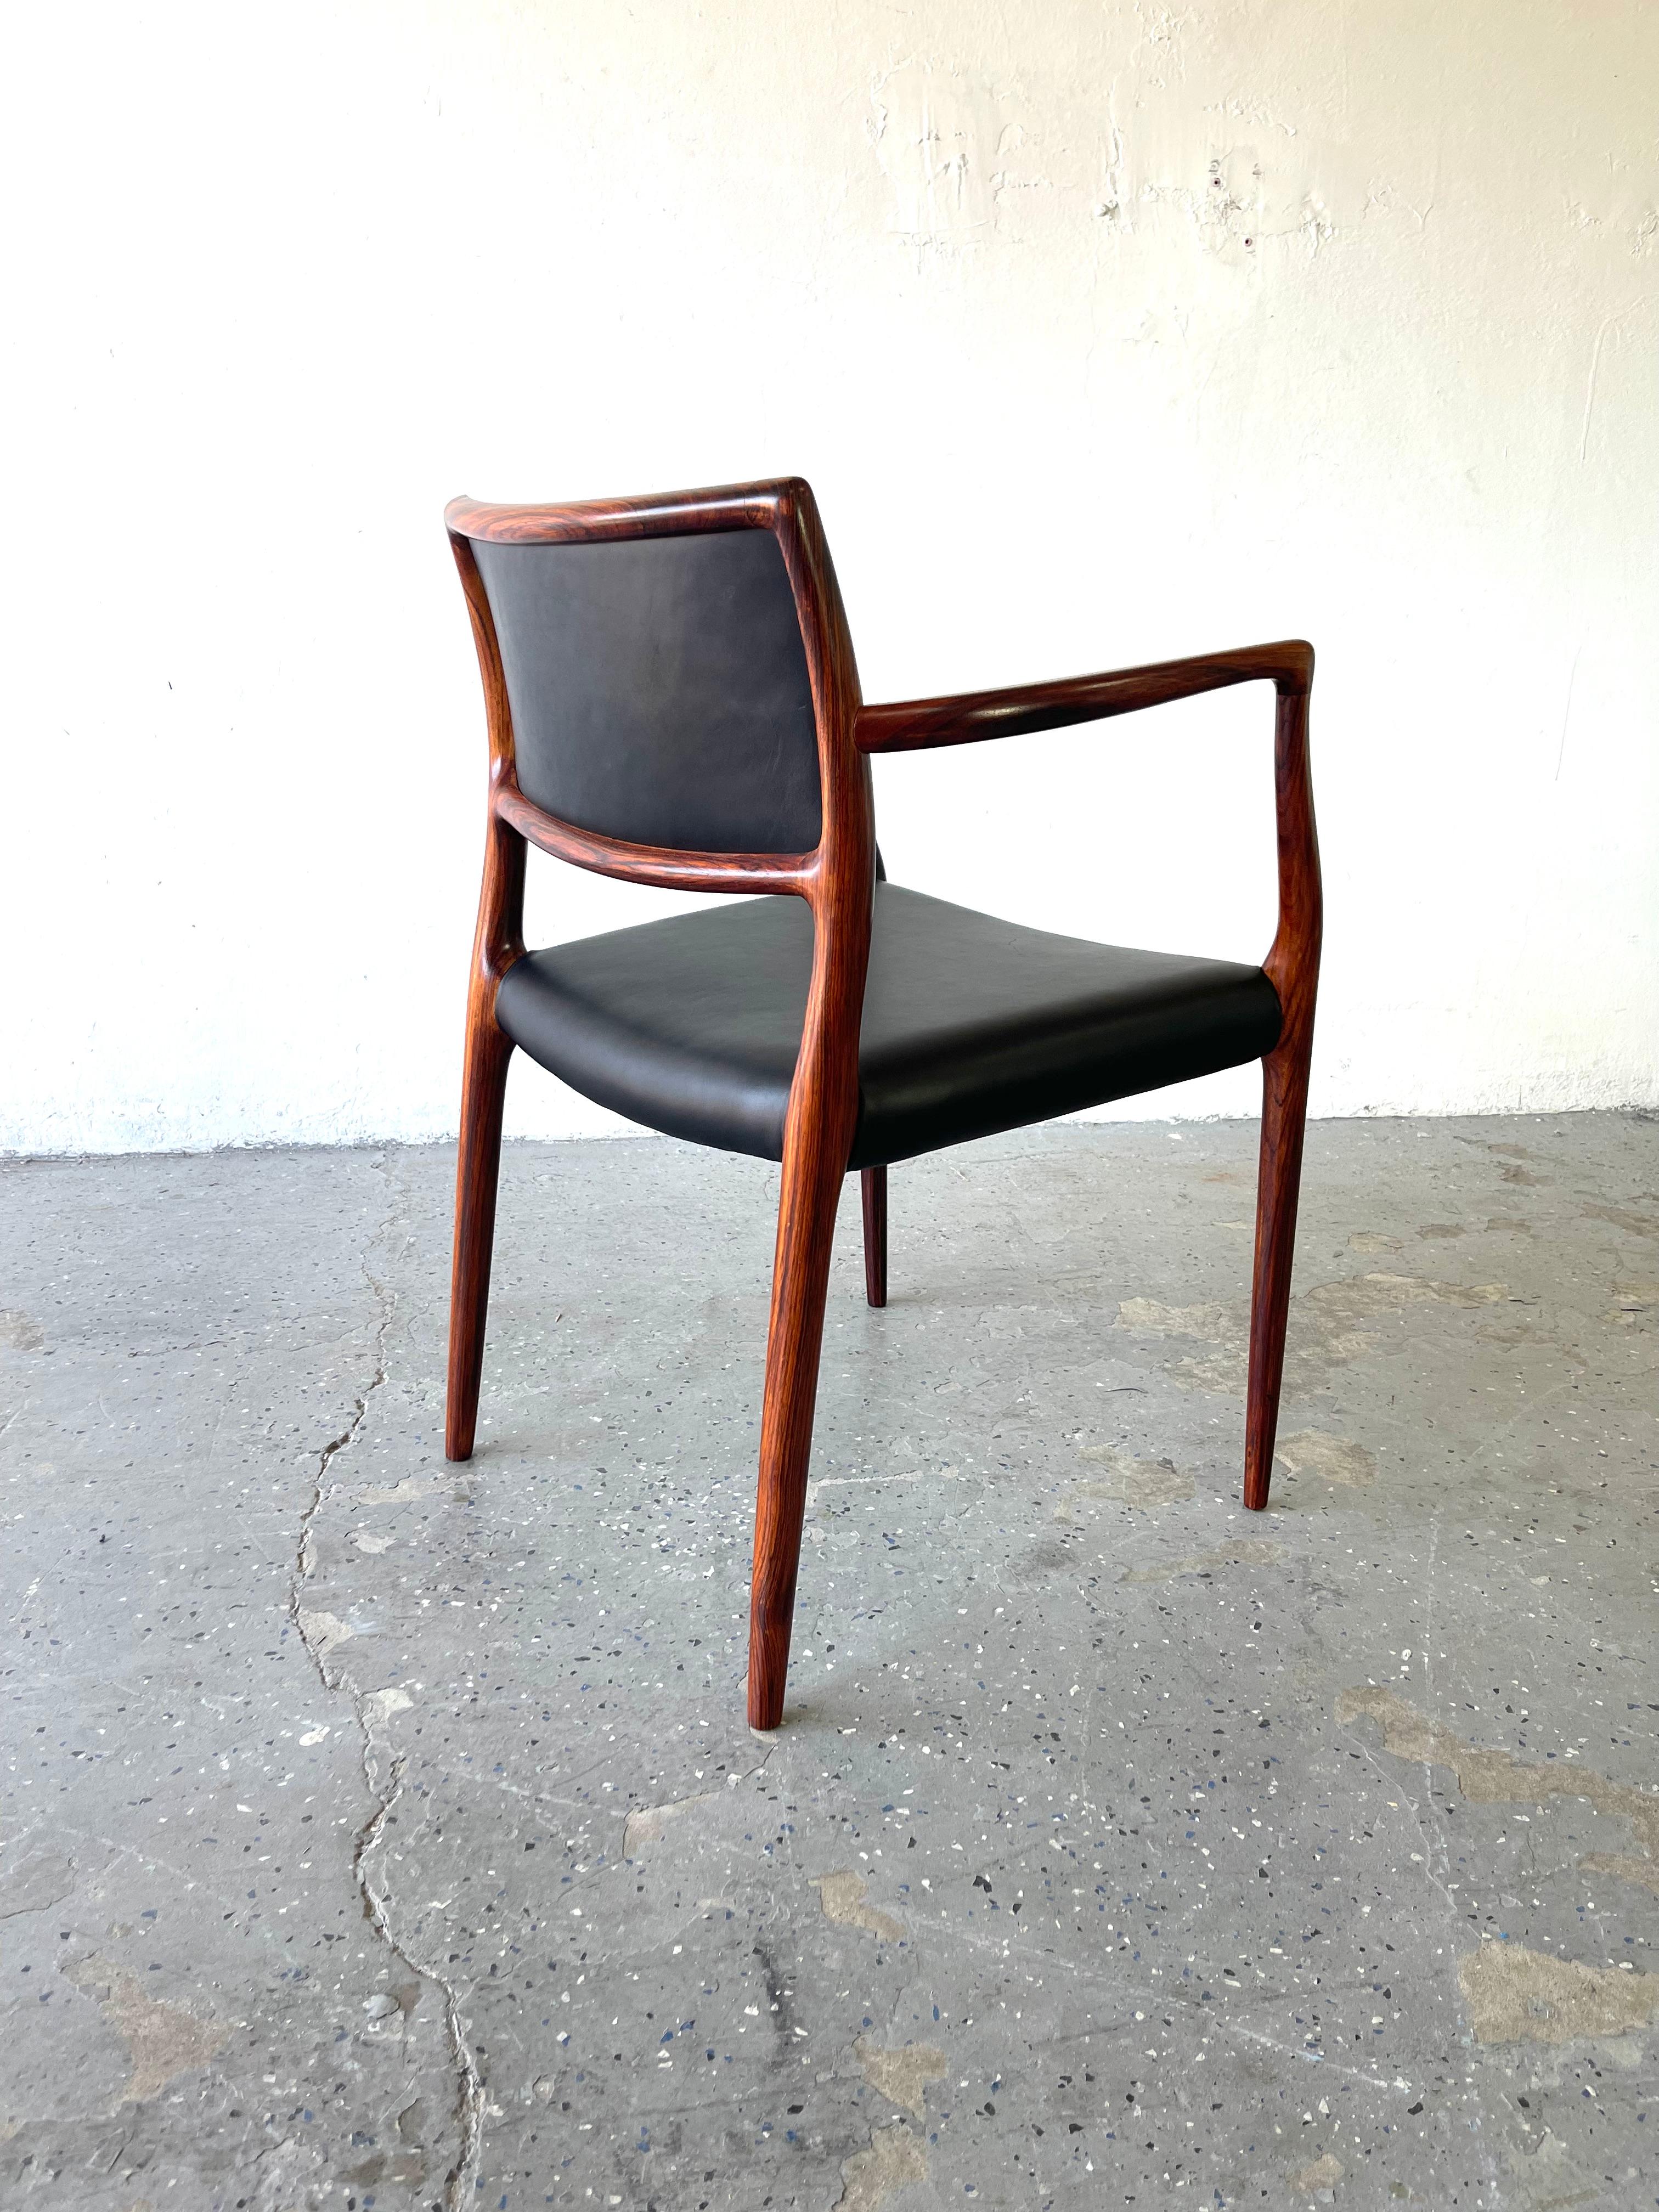 Set of 6 Rosewood Model 65 & 80 JL Moller Mid-Century Danish Modern Dining Chair In Excellent Condition For Sale In Las Vegas, NV